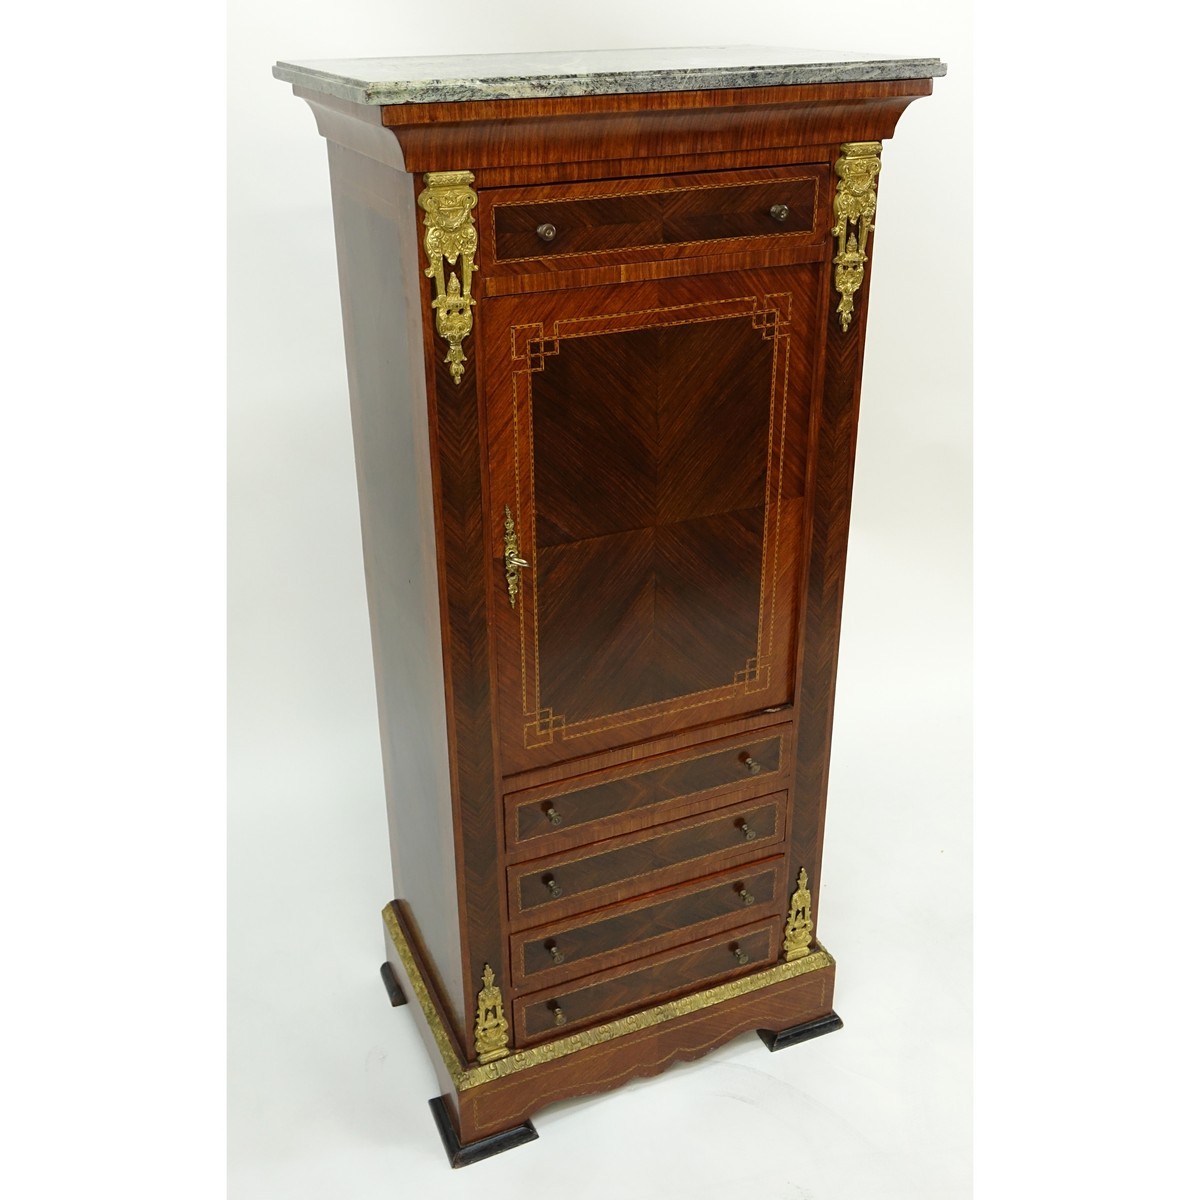 Tall Mid Century Louis XVI Style Gilt Brass Inlaid Secretary Desk with Marble Top. Large center door with four sliding doors, key included.